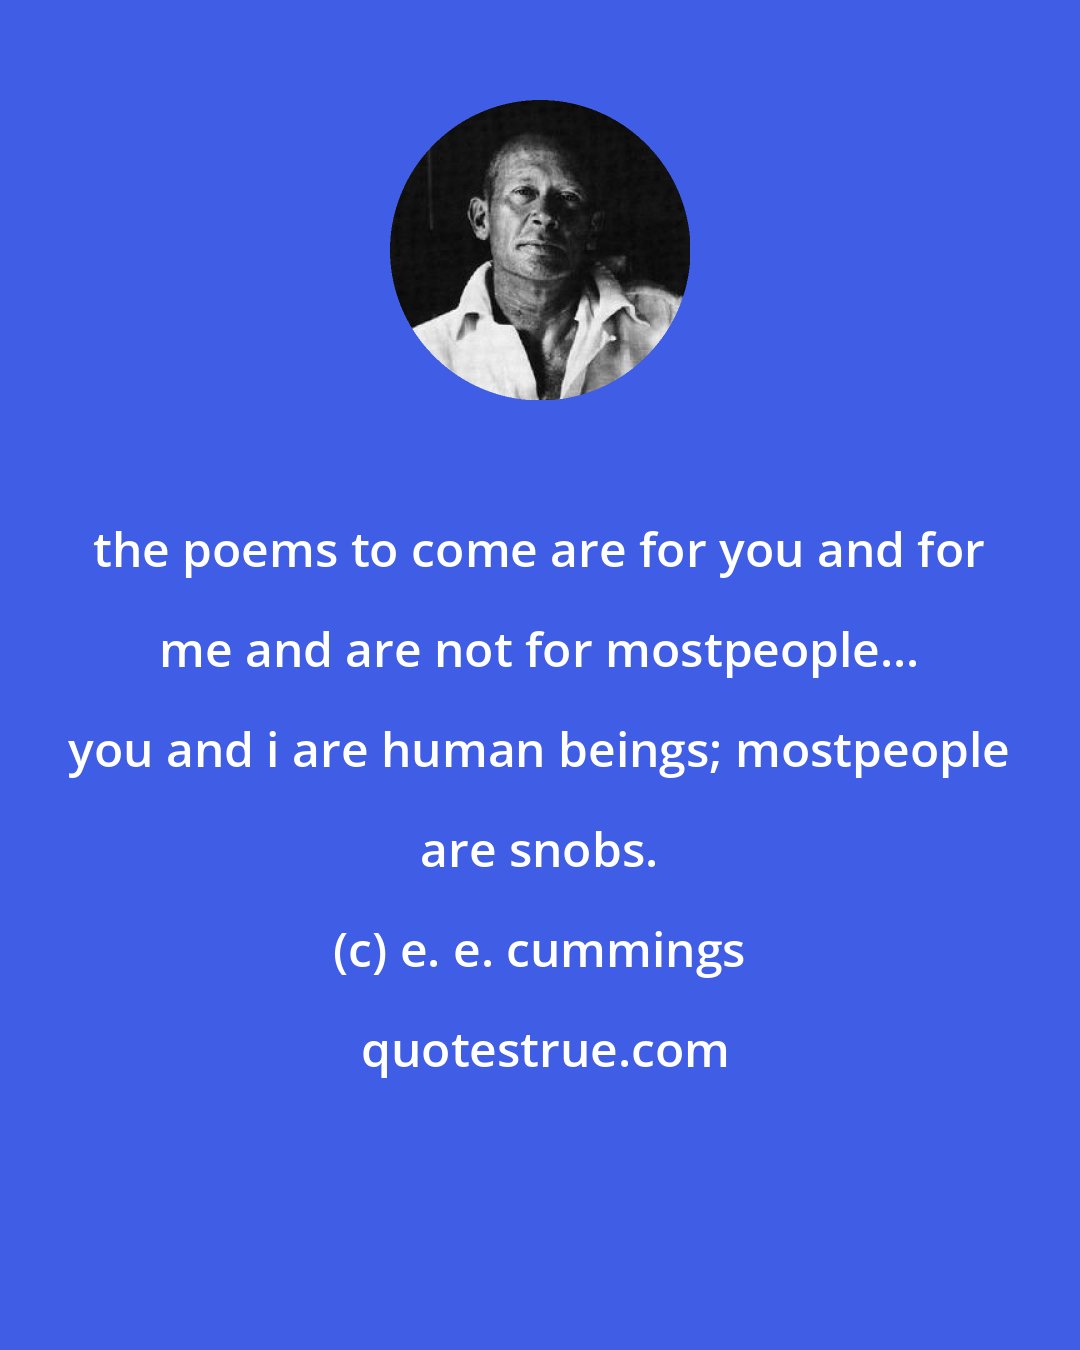 e. e. cummings: the poems to come are for you and for me and are not for mostpeople... you and i are human beings; mostpeople are snobs.